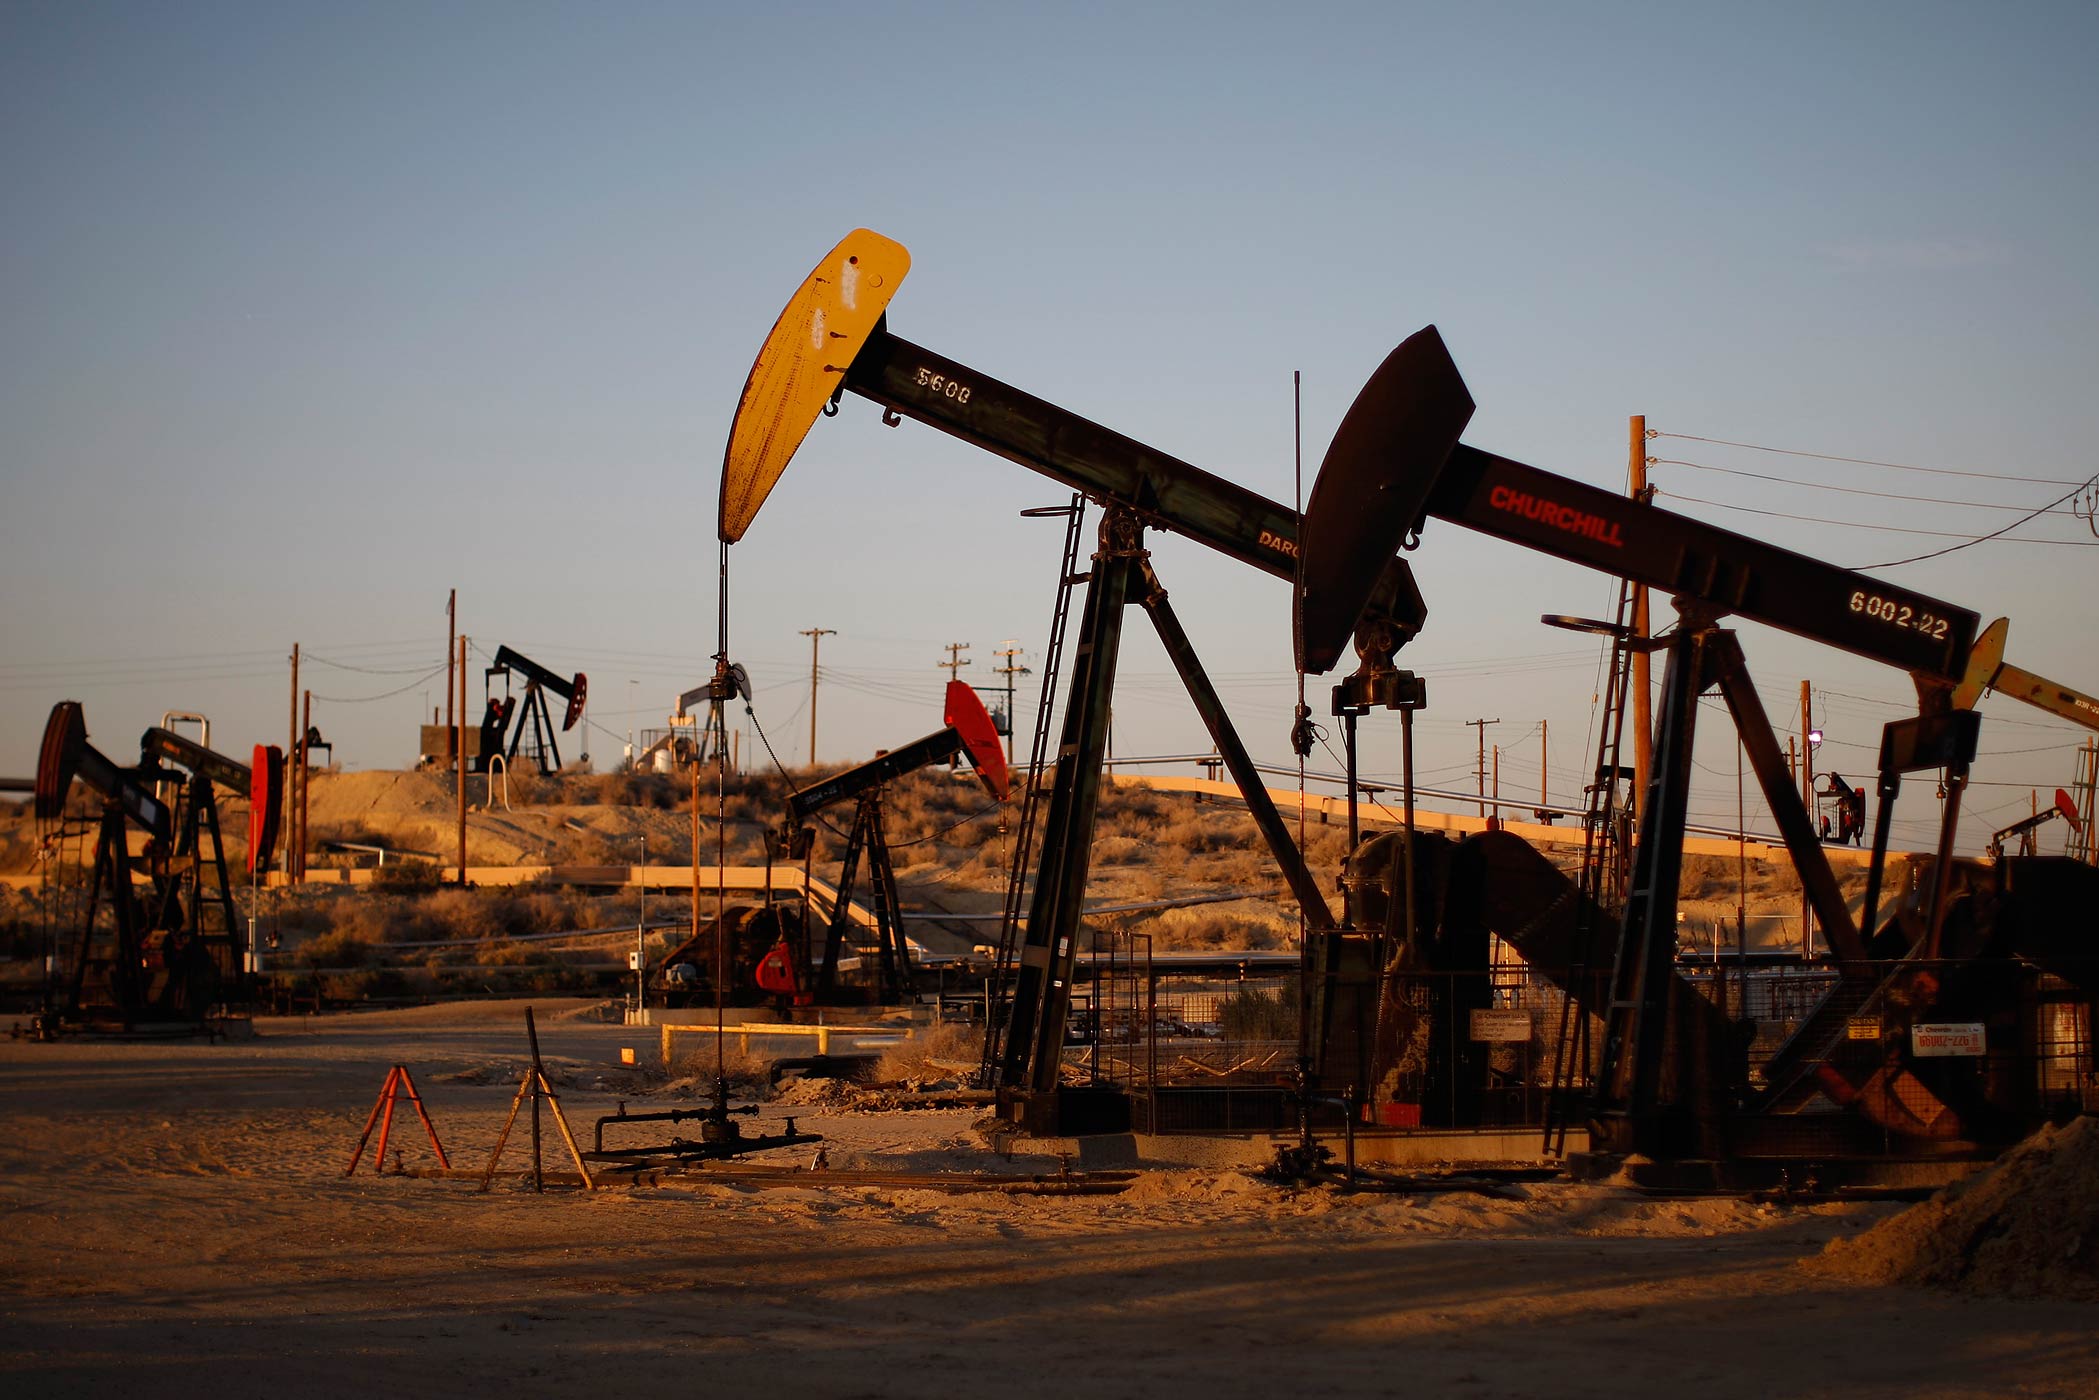 Pump jacks and wells are seen in an oil field that uses fracking on the Monterey Shale formation near McKittrick, Ca. on March 23, 2014. (David McNew—Getty Images)